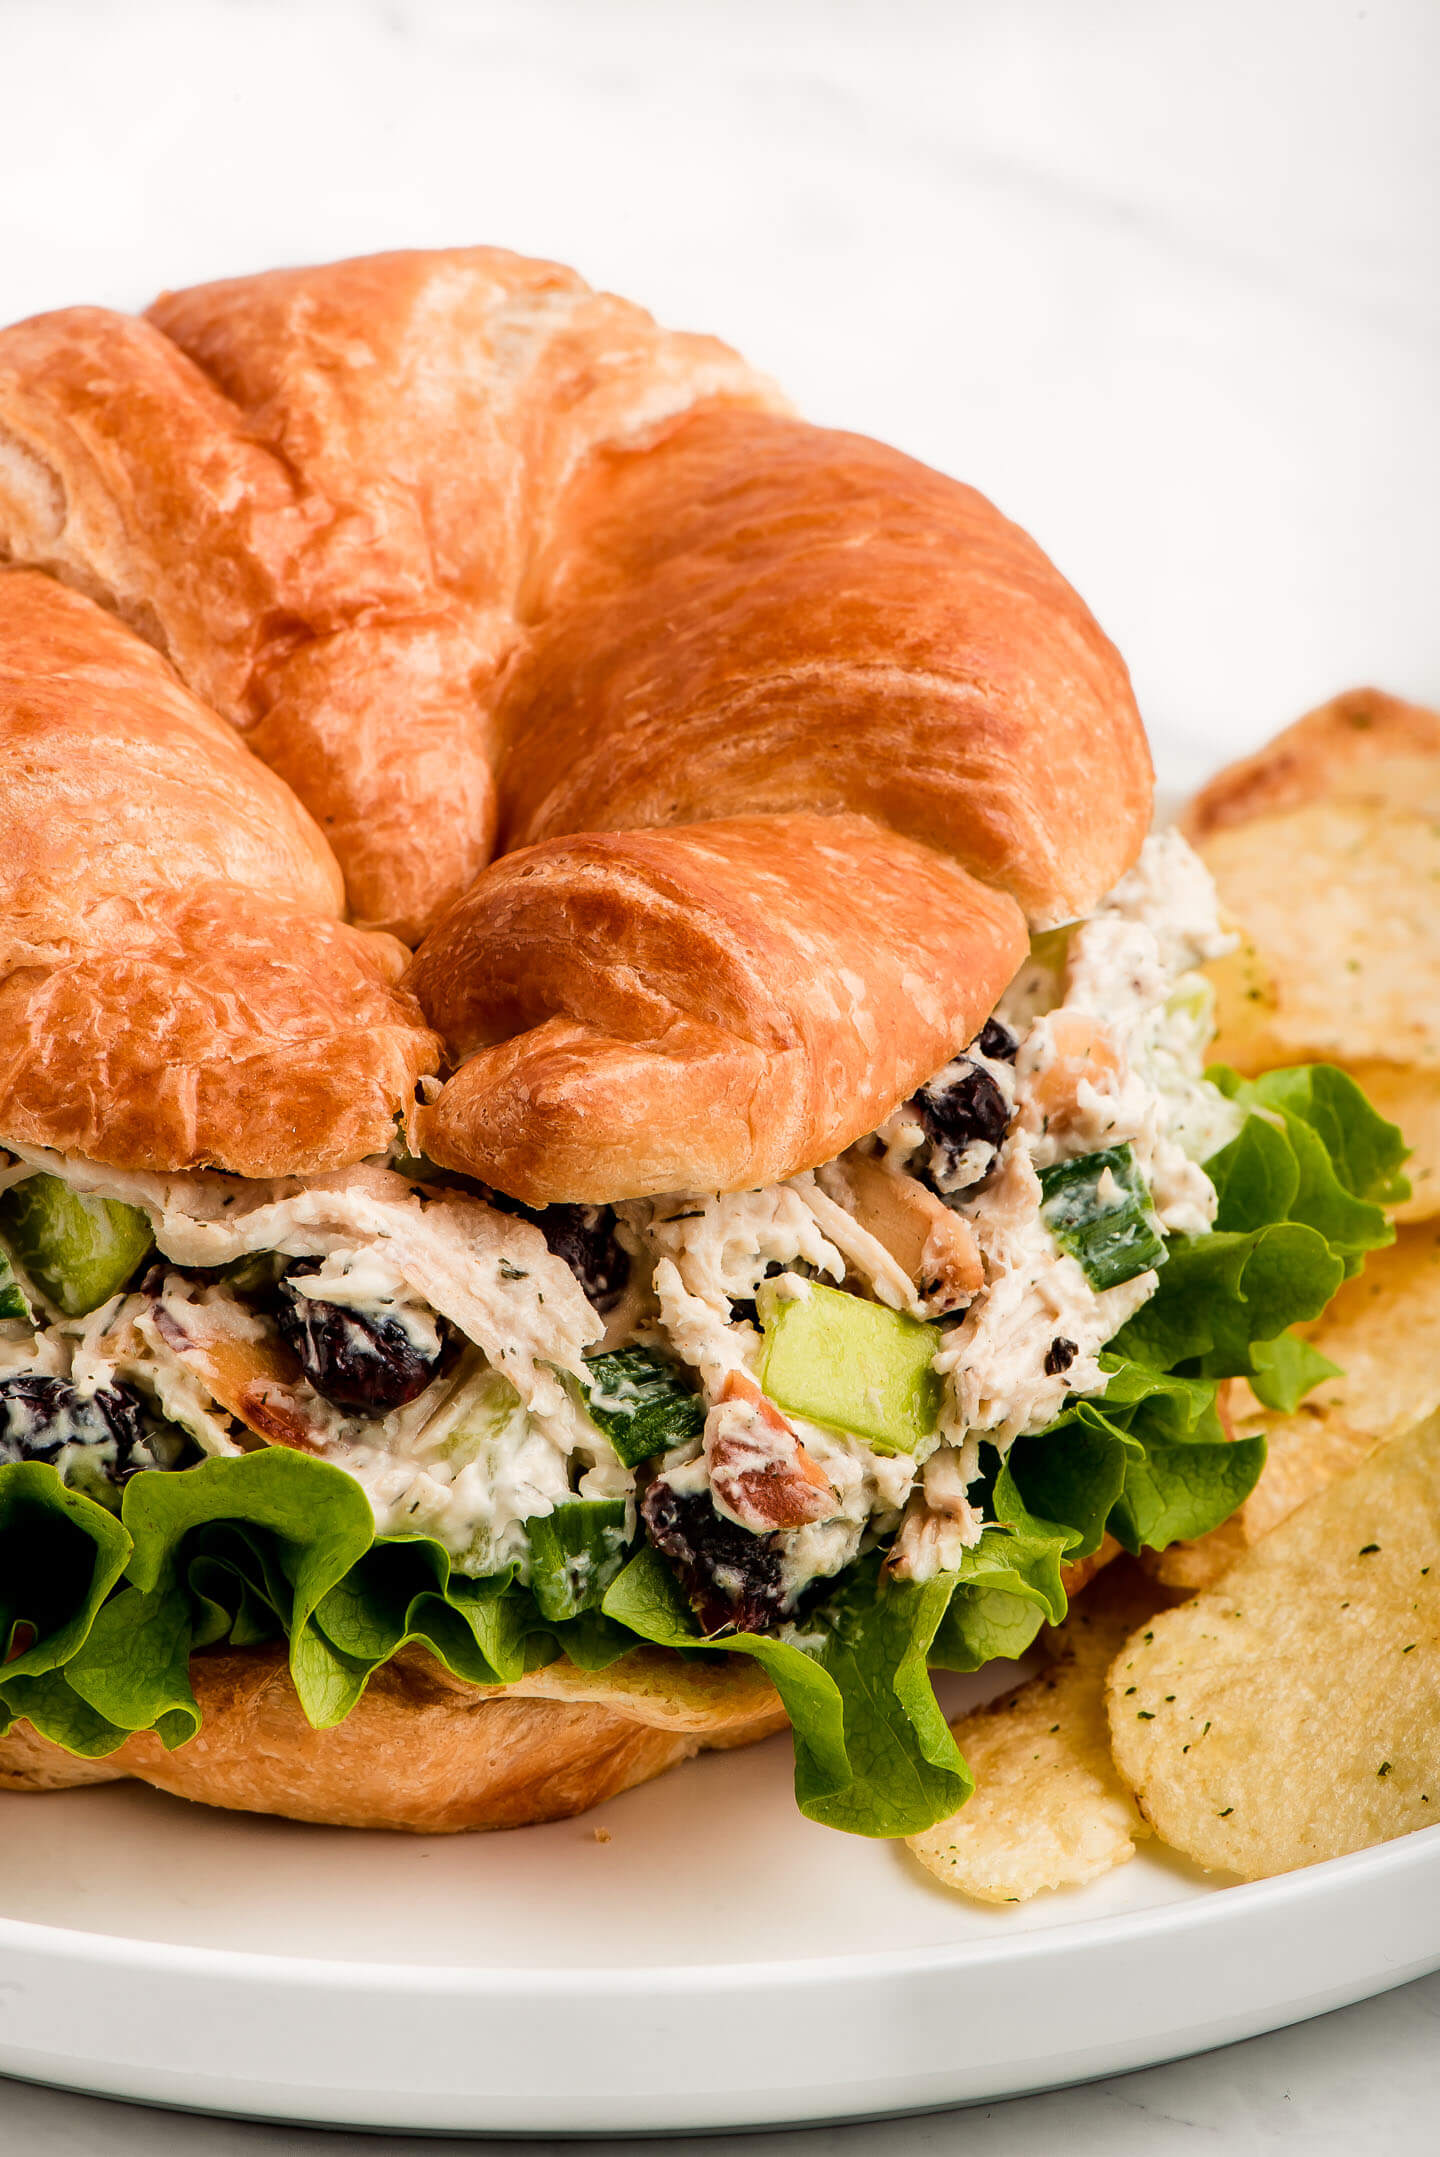 Angle view of a sandwich with a mix of shredded chicken, apples, almonds, green onion, and grapes.